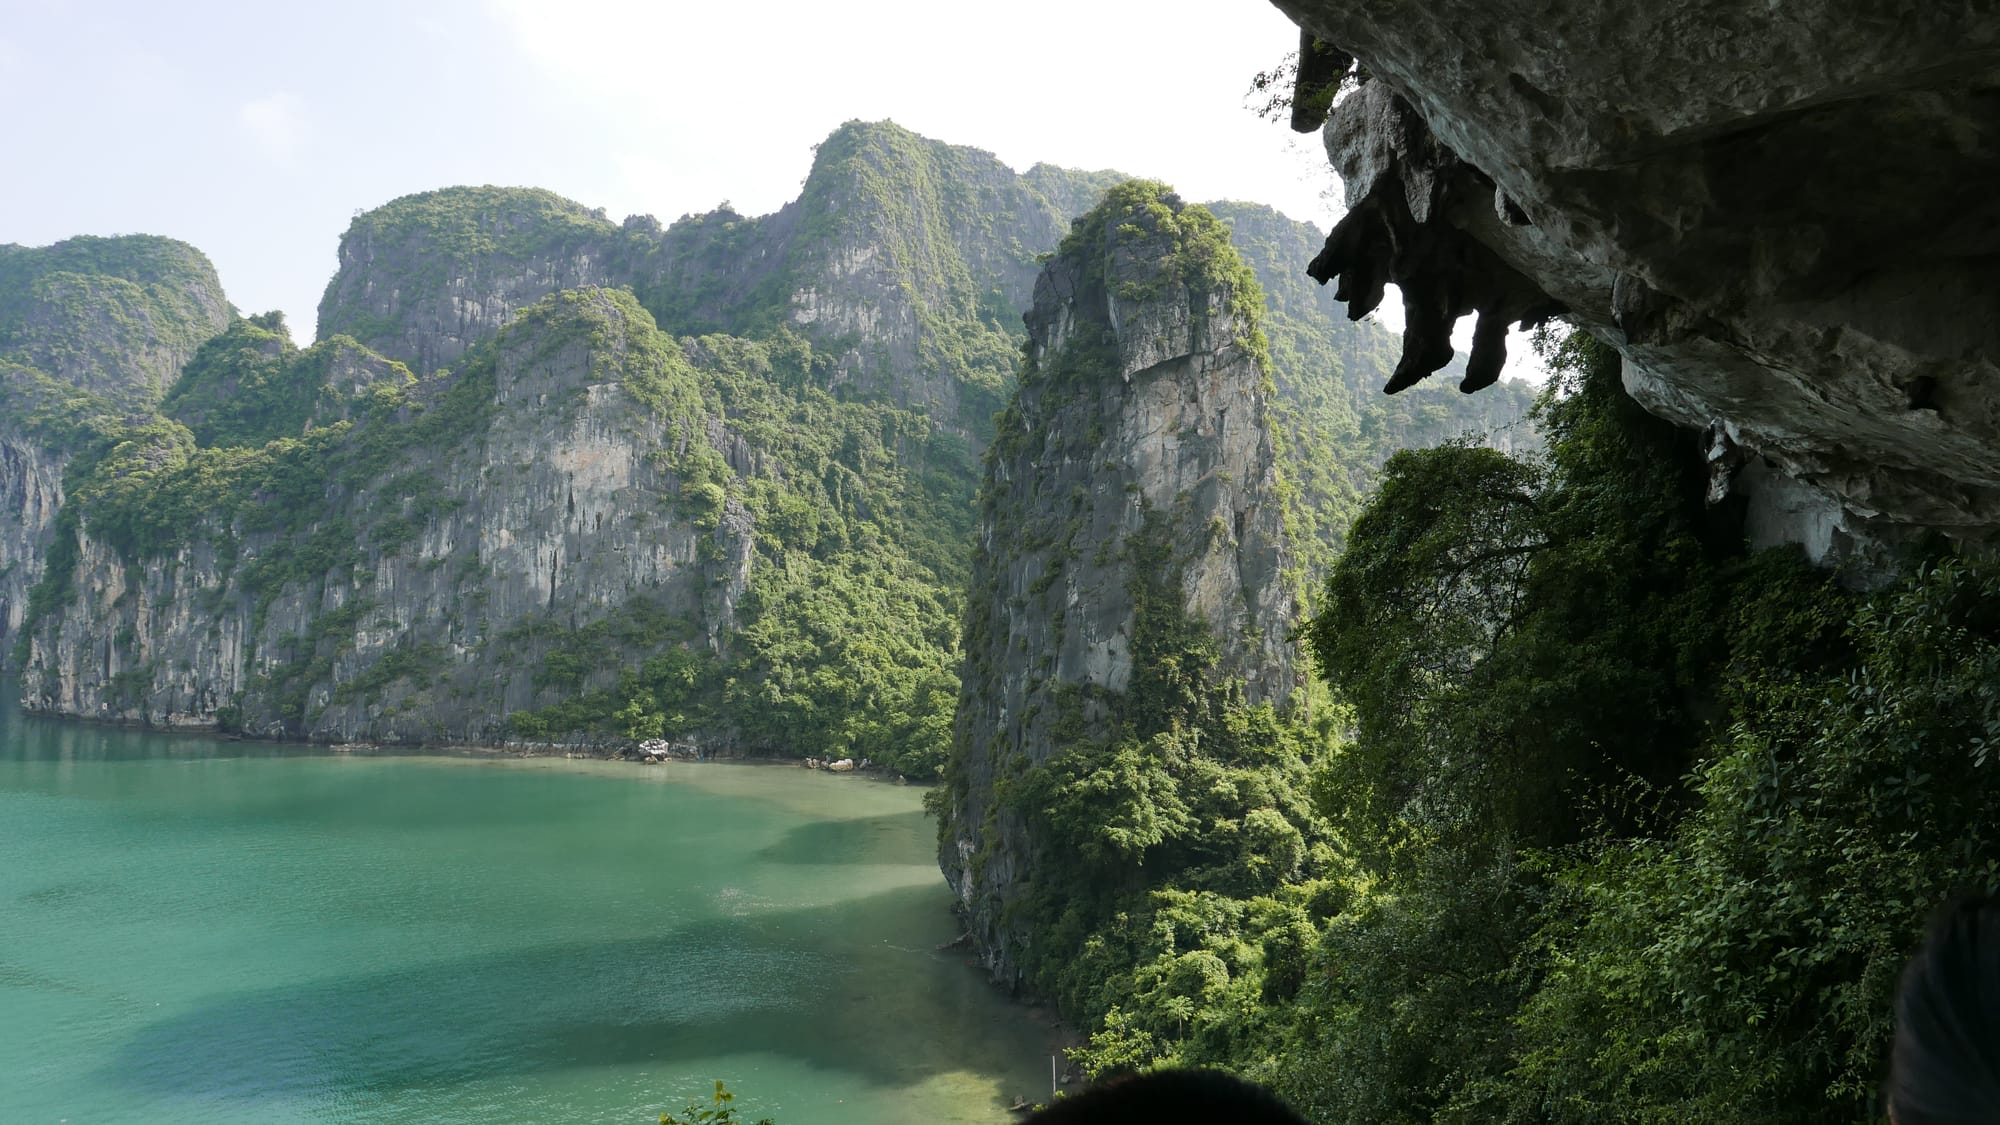 Photo by Author — the mysterious feet hanging over the edge of a cliff — Surprise Cave, Ha Long Bay, Vietnam